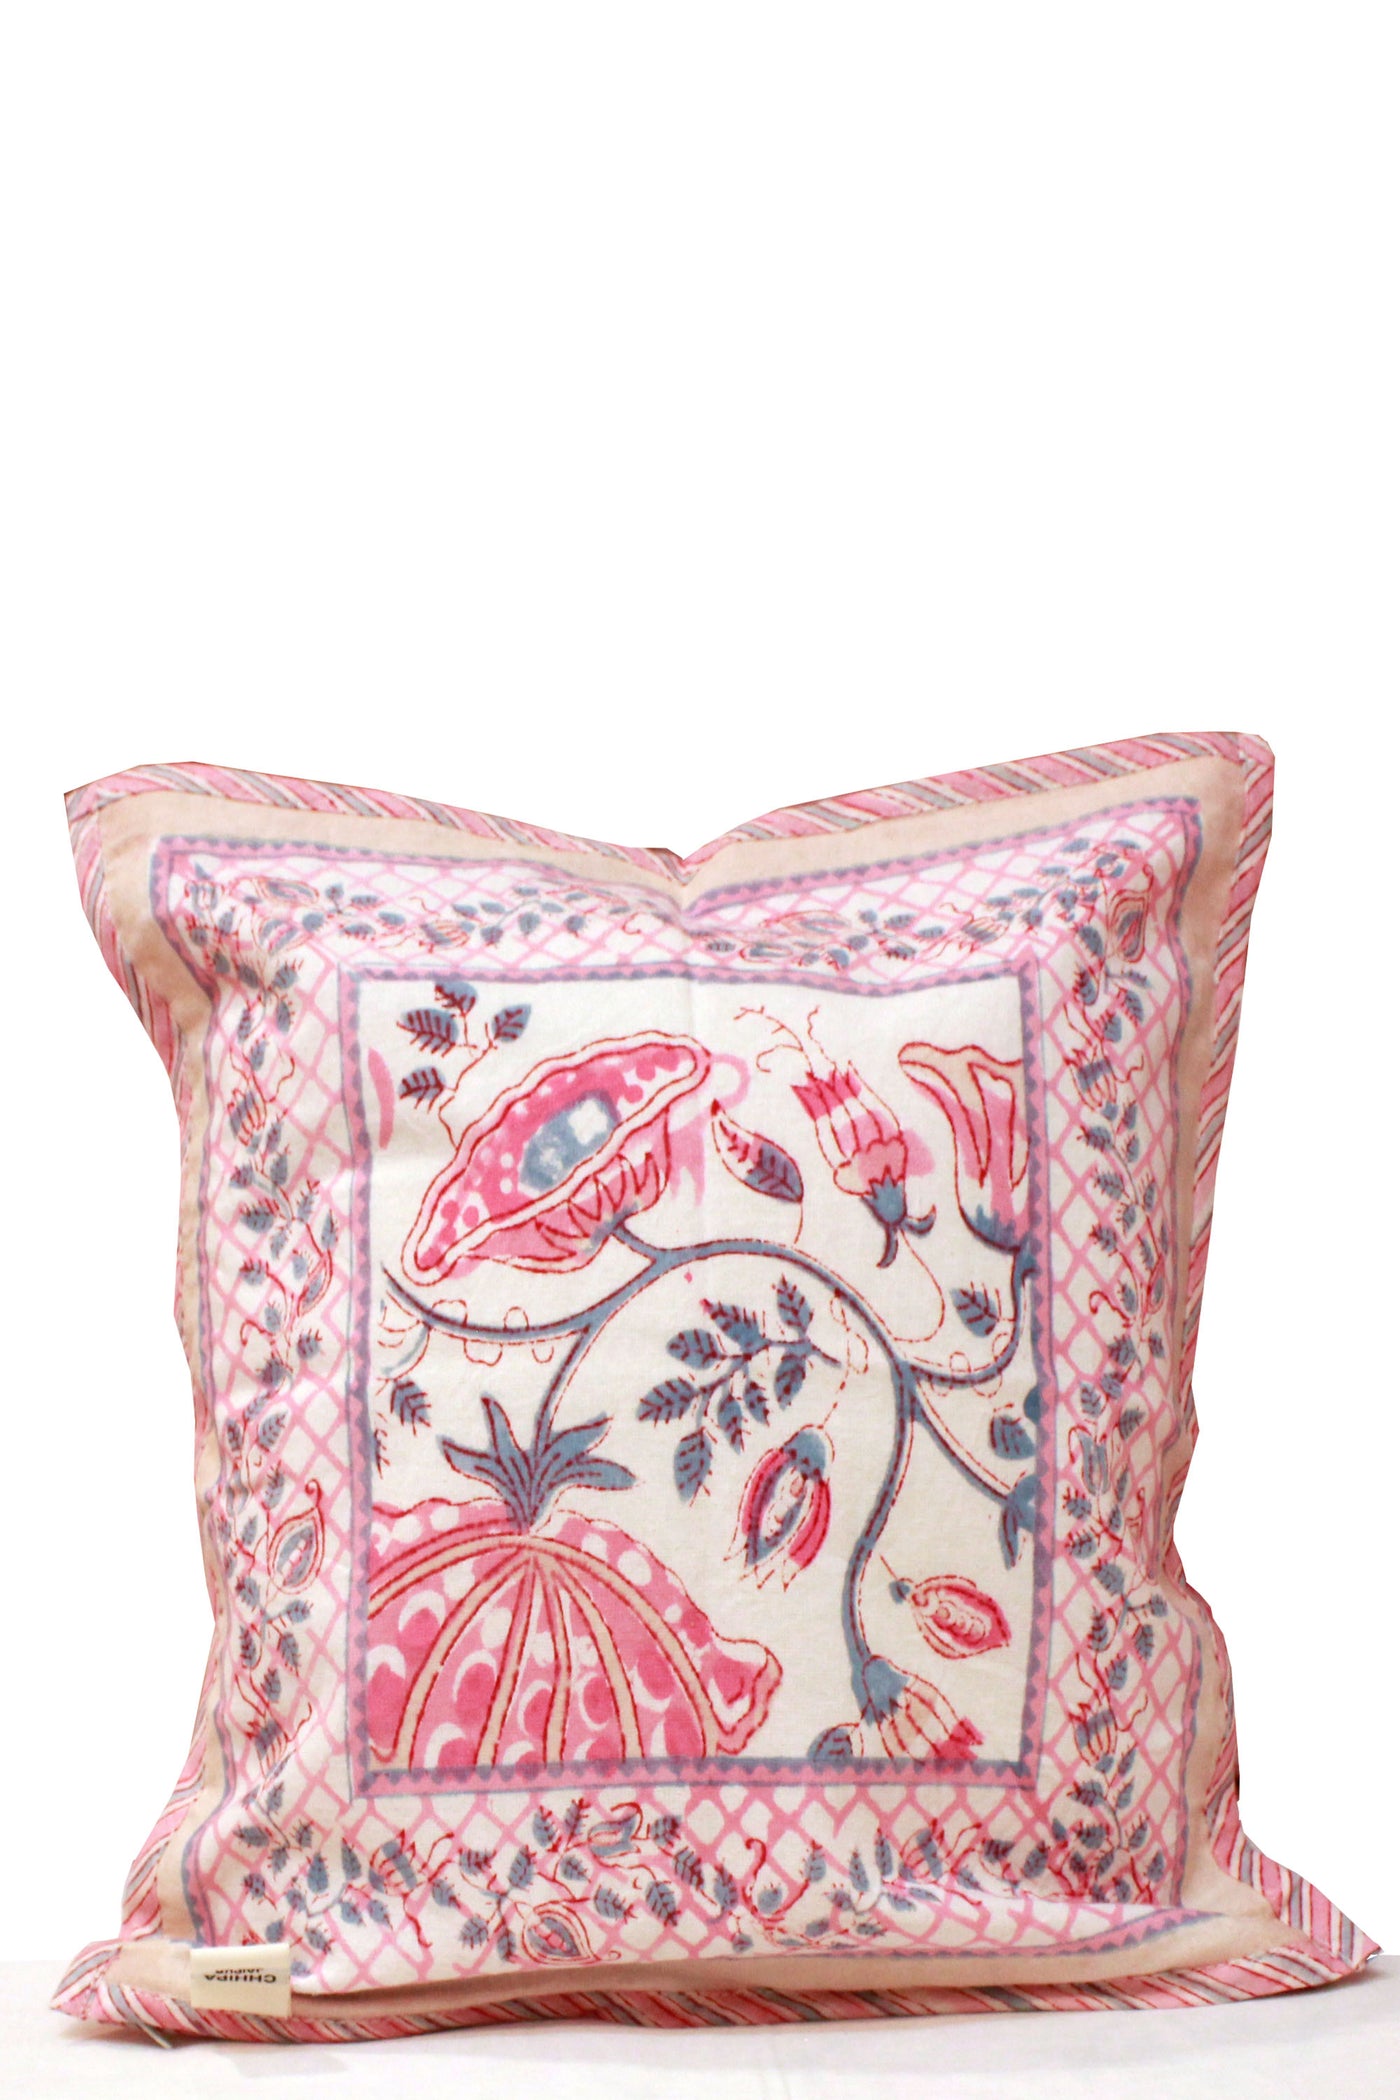 Cotton Flower Jaal Hand Block Printed Cushion Cover in Kashish Pink